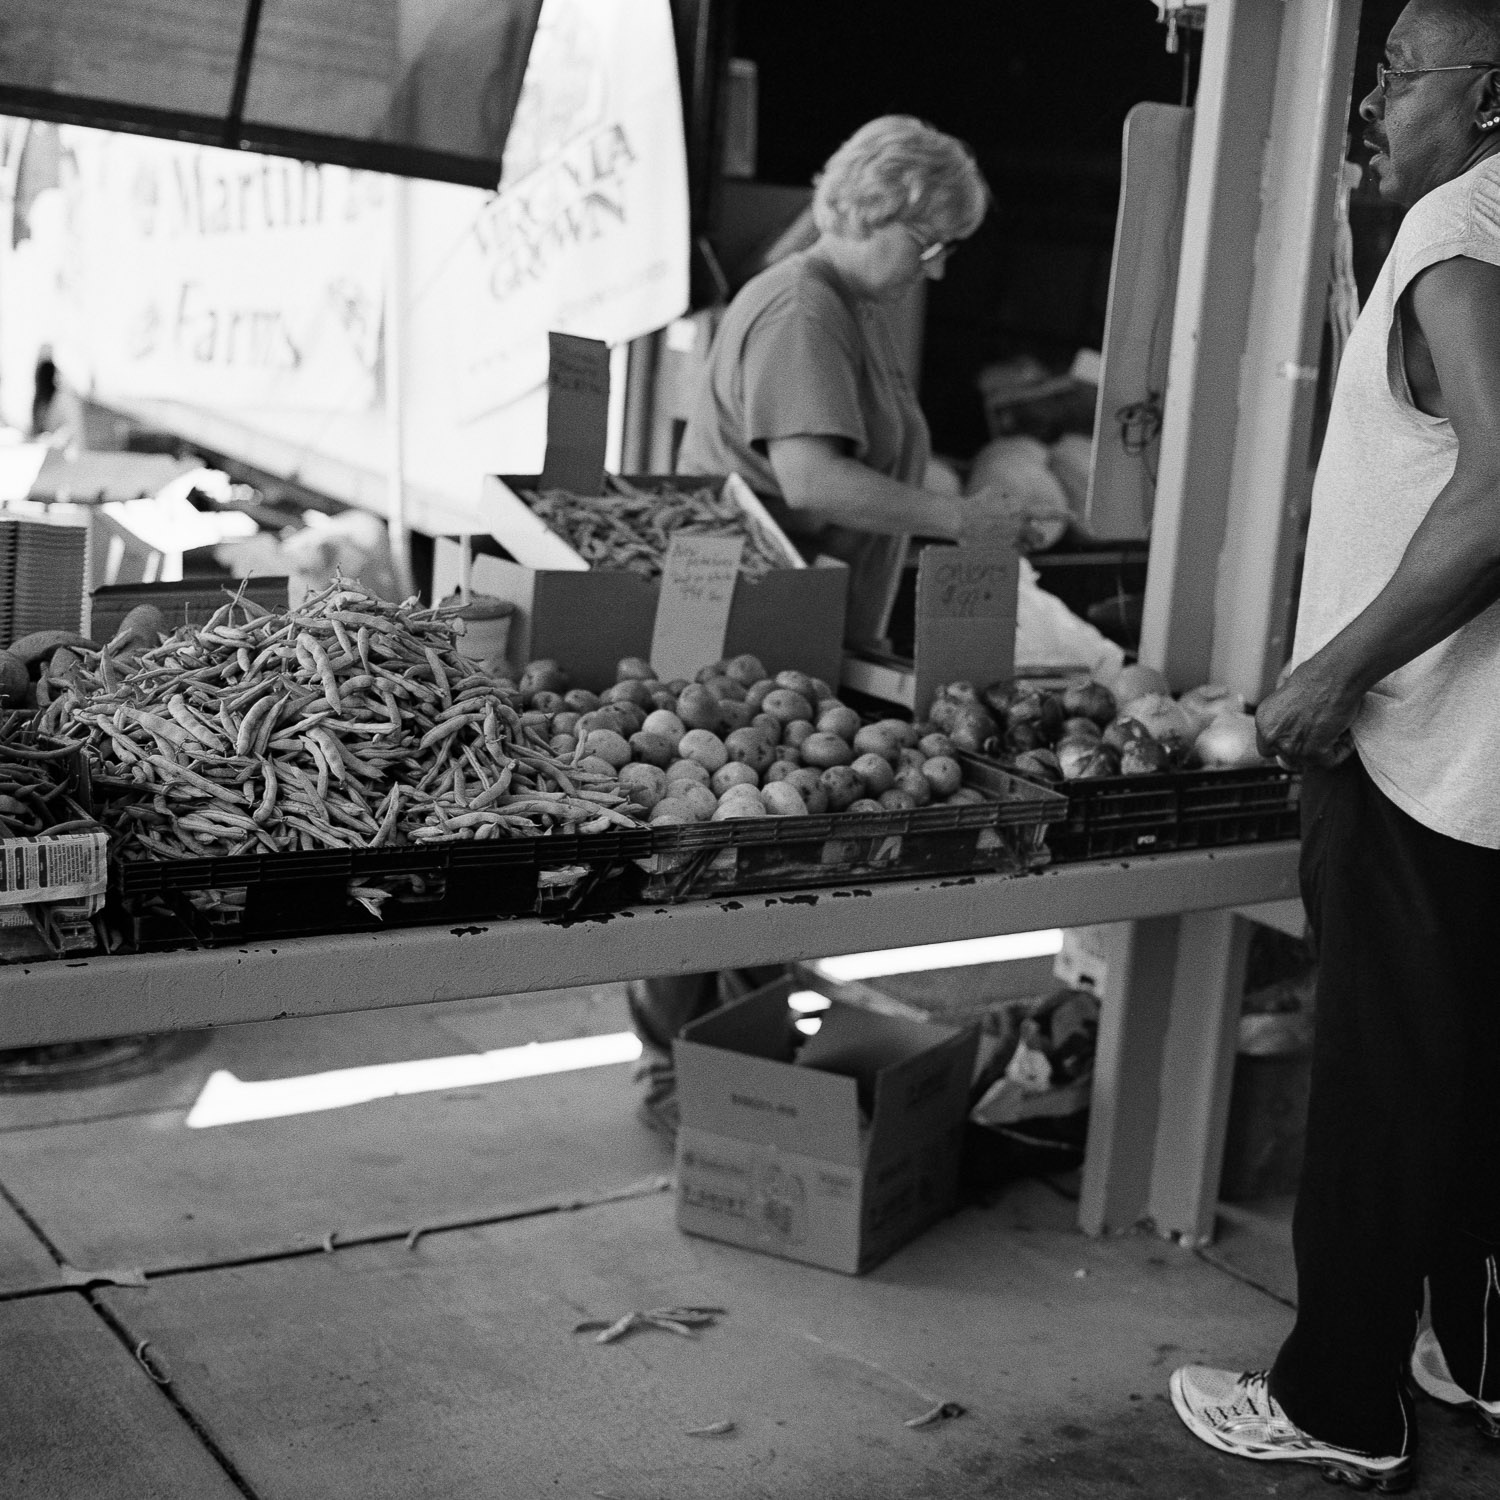 person buying produce at the farmers market